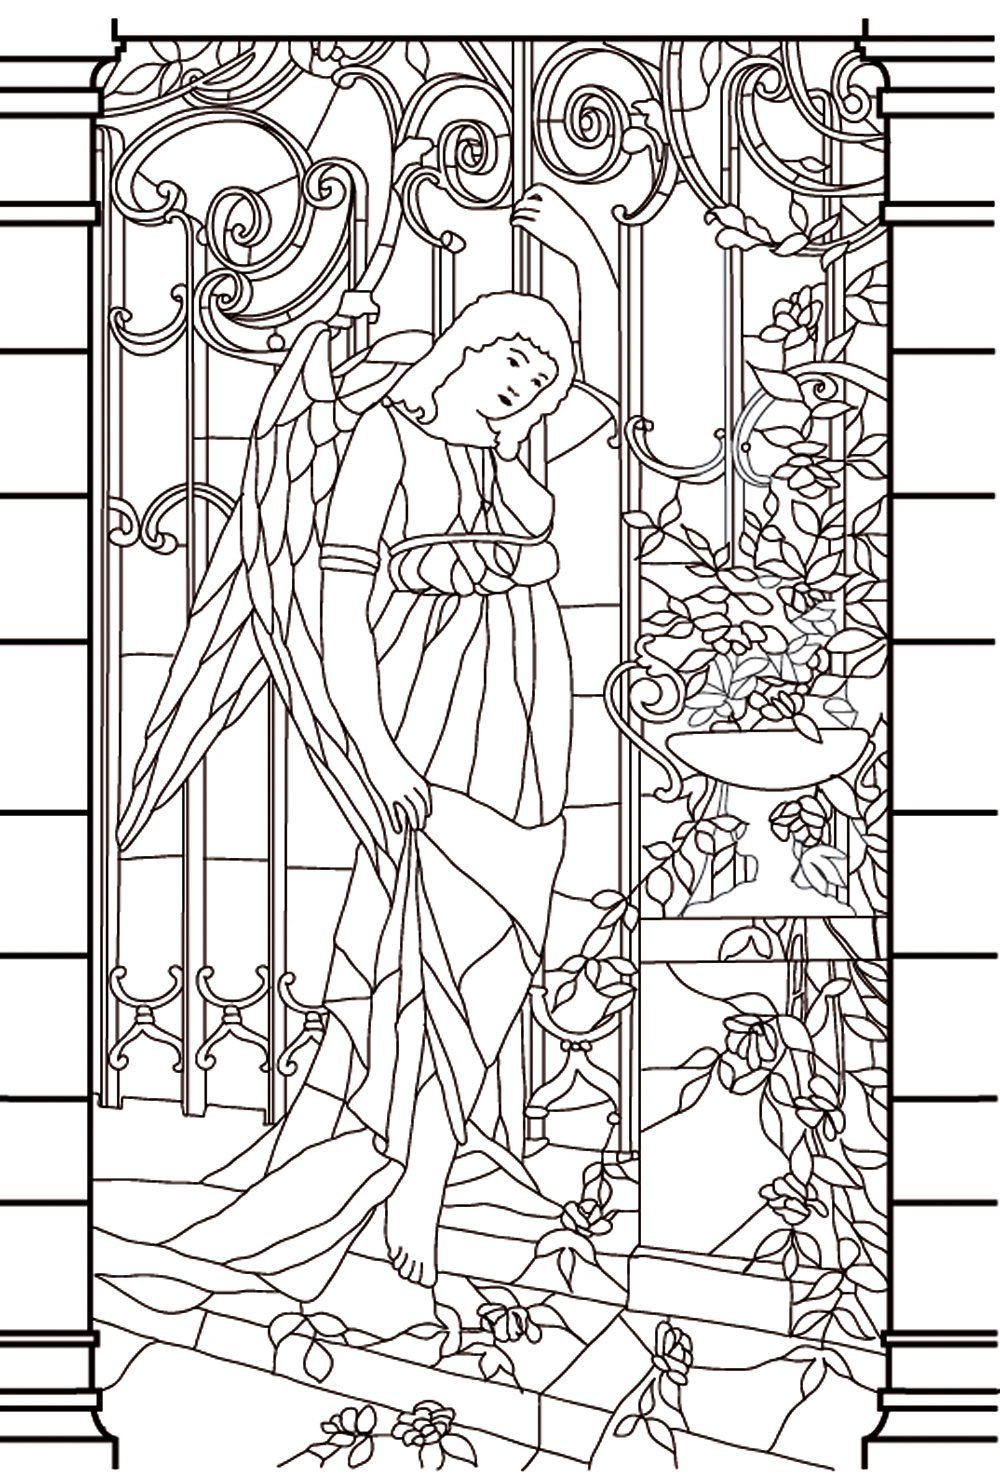 abinadi coloring pages pinterest - photo #23